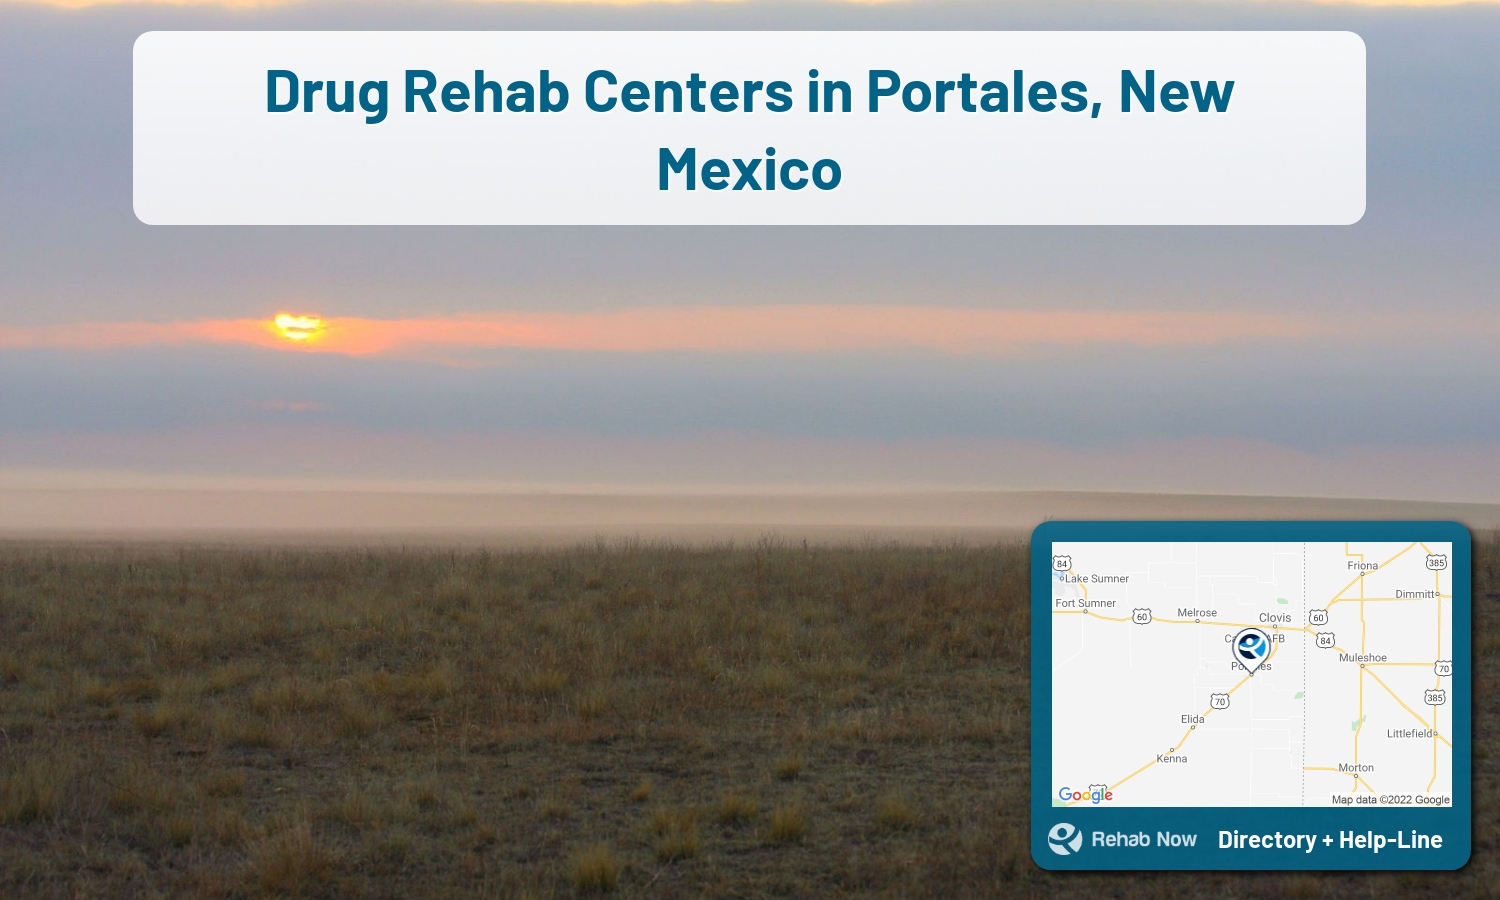 View options, availability, treatment methods, and more, for drug rehab and alcohol treatment in Portales, New Mexico